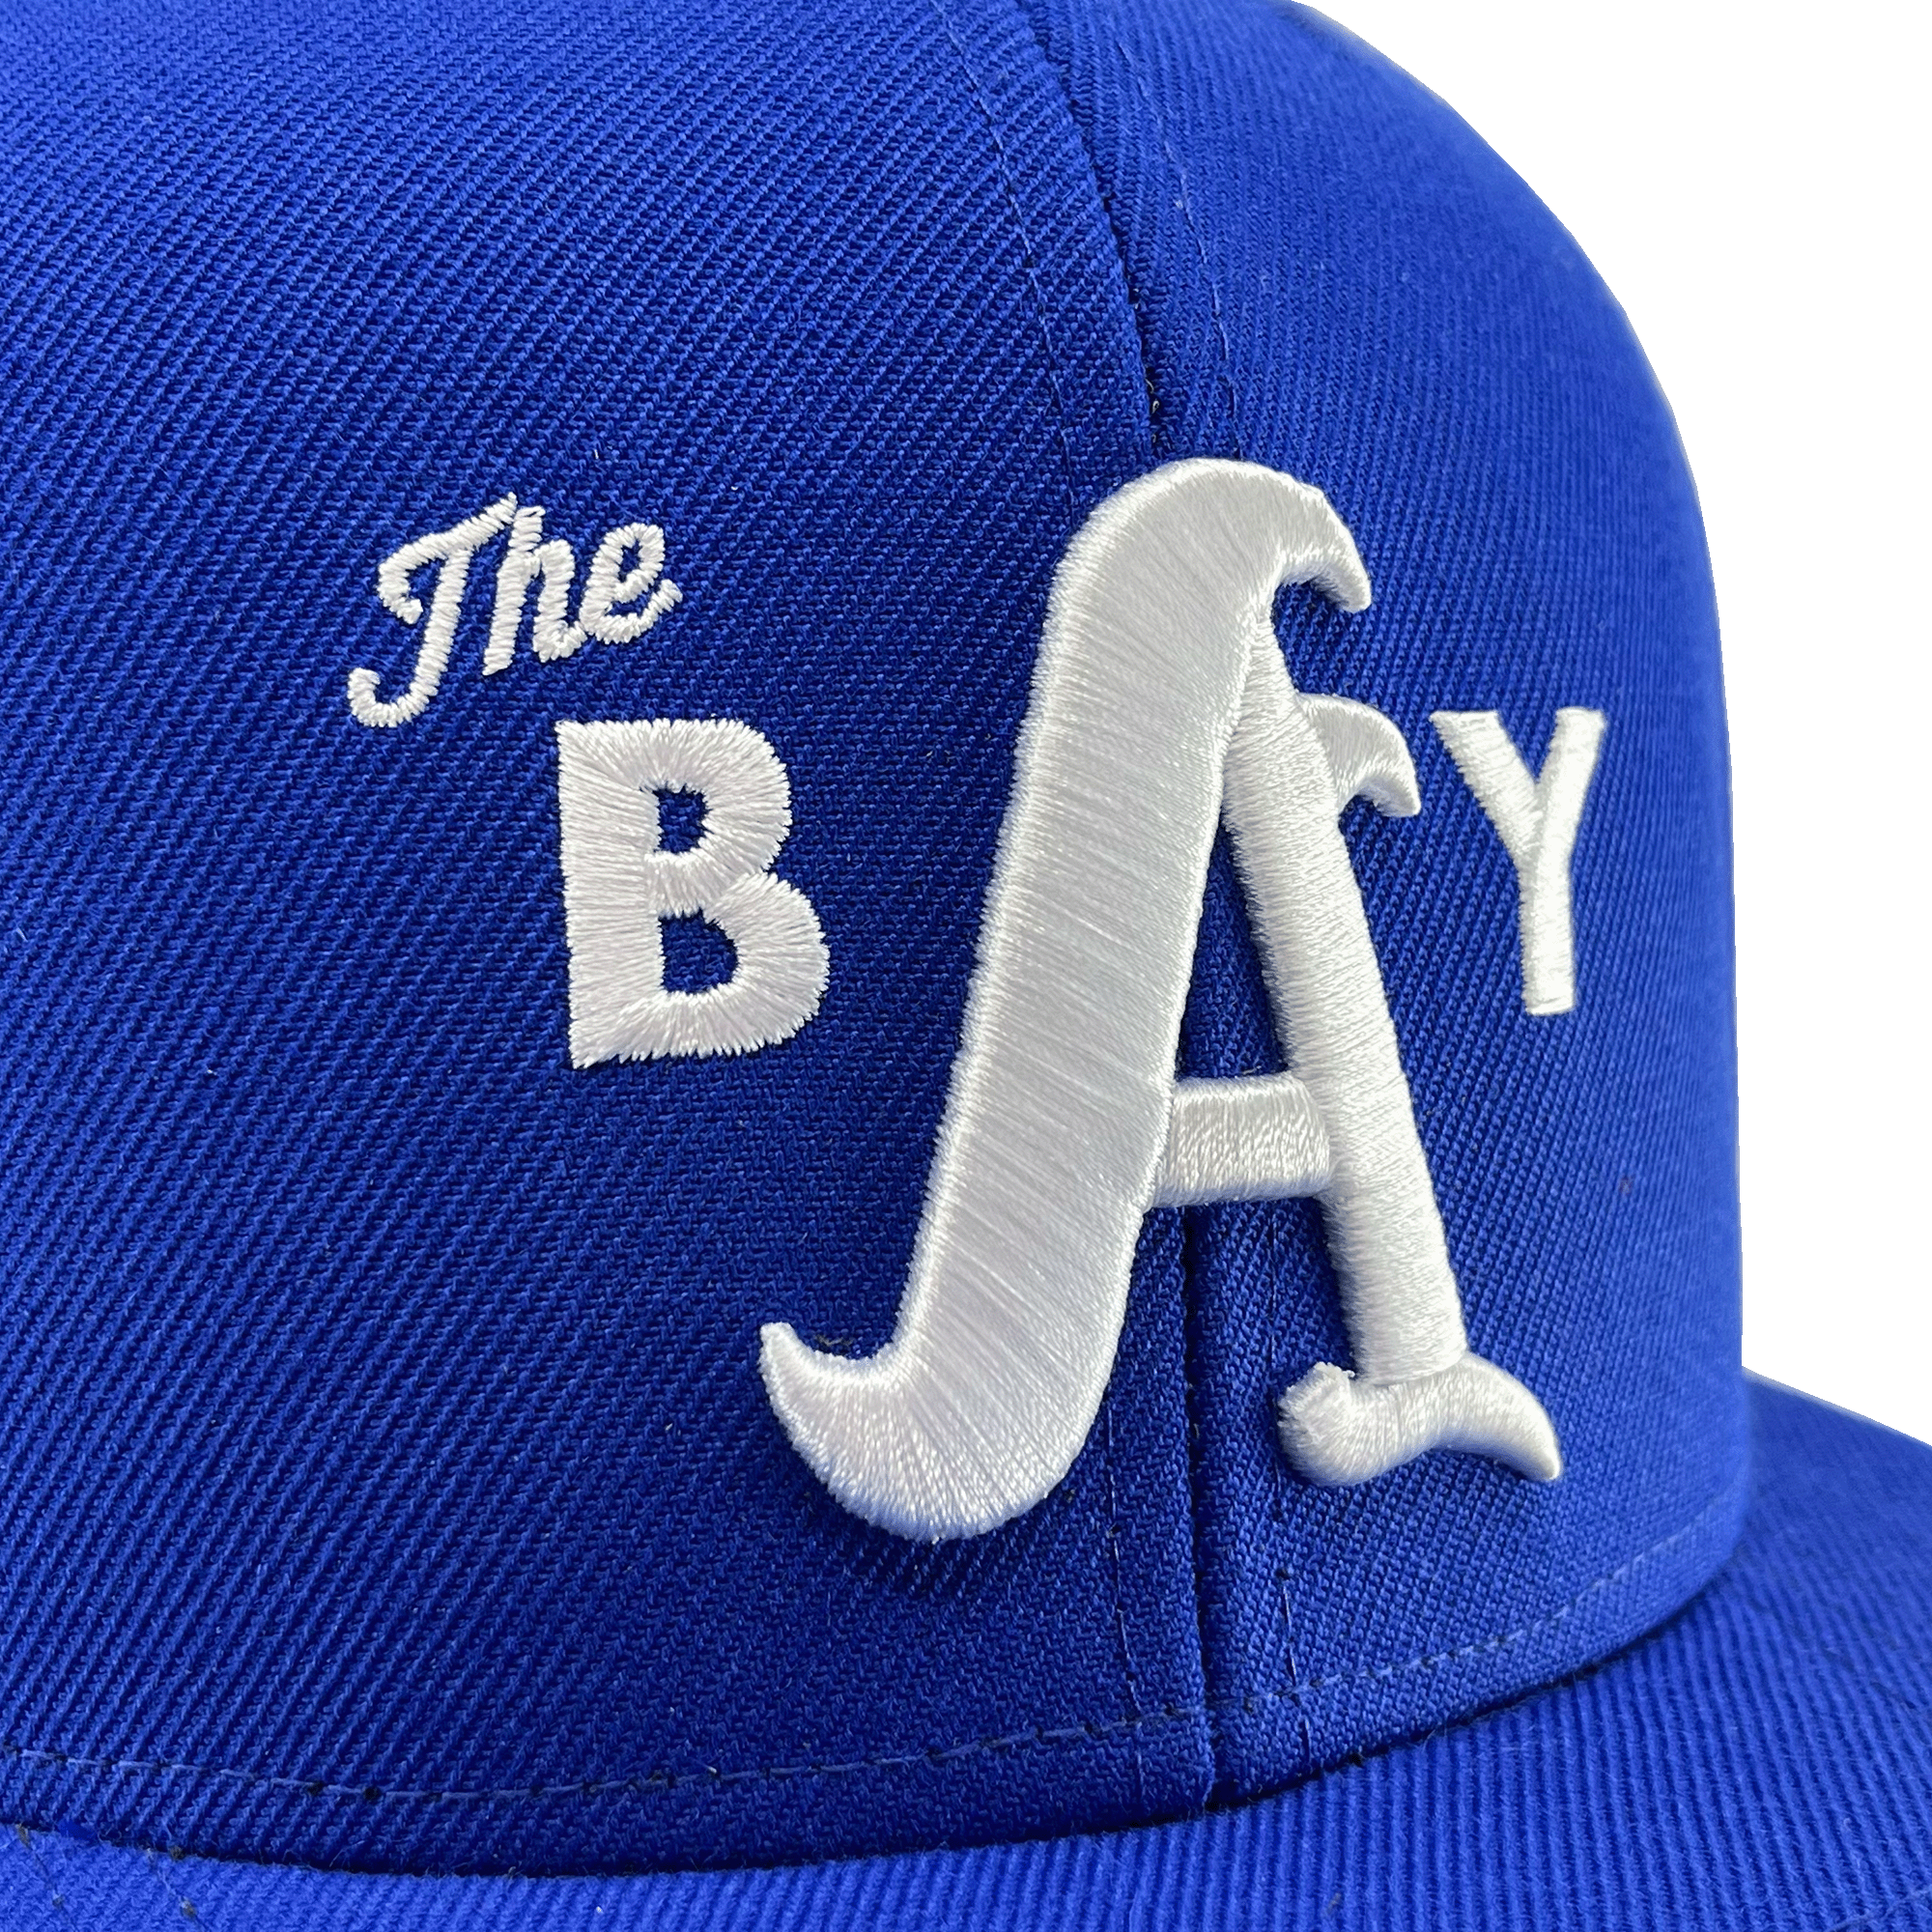 Close-up of a 3D white embroidered The Bay logo on the crown of a royal blue hat.